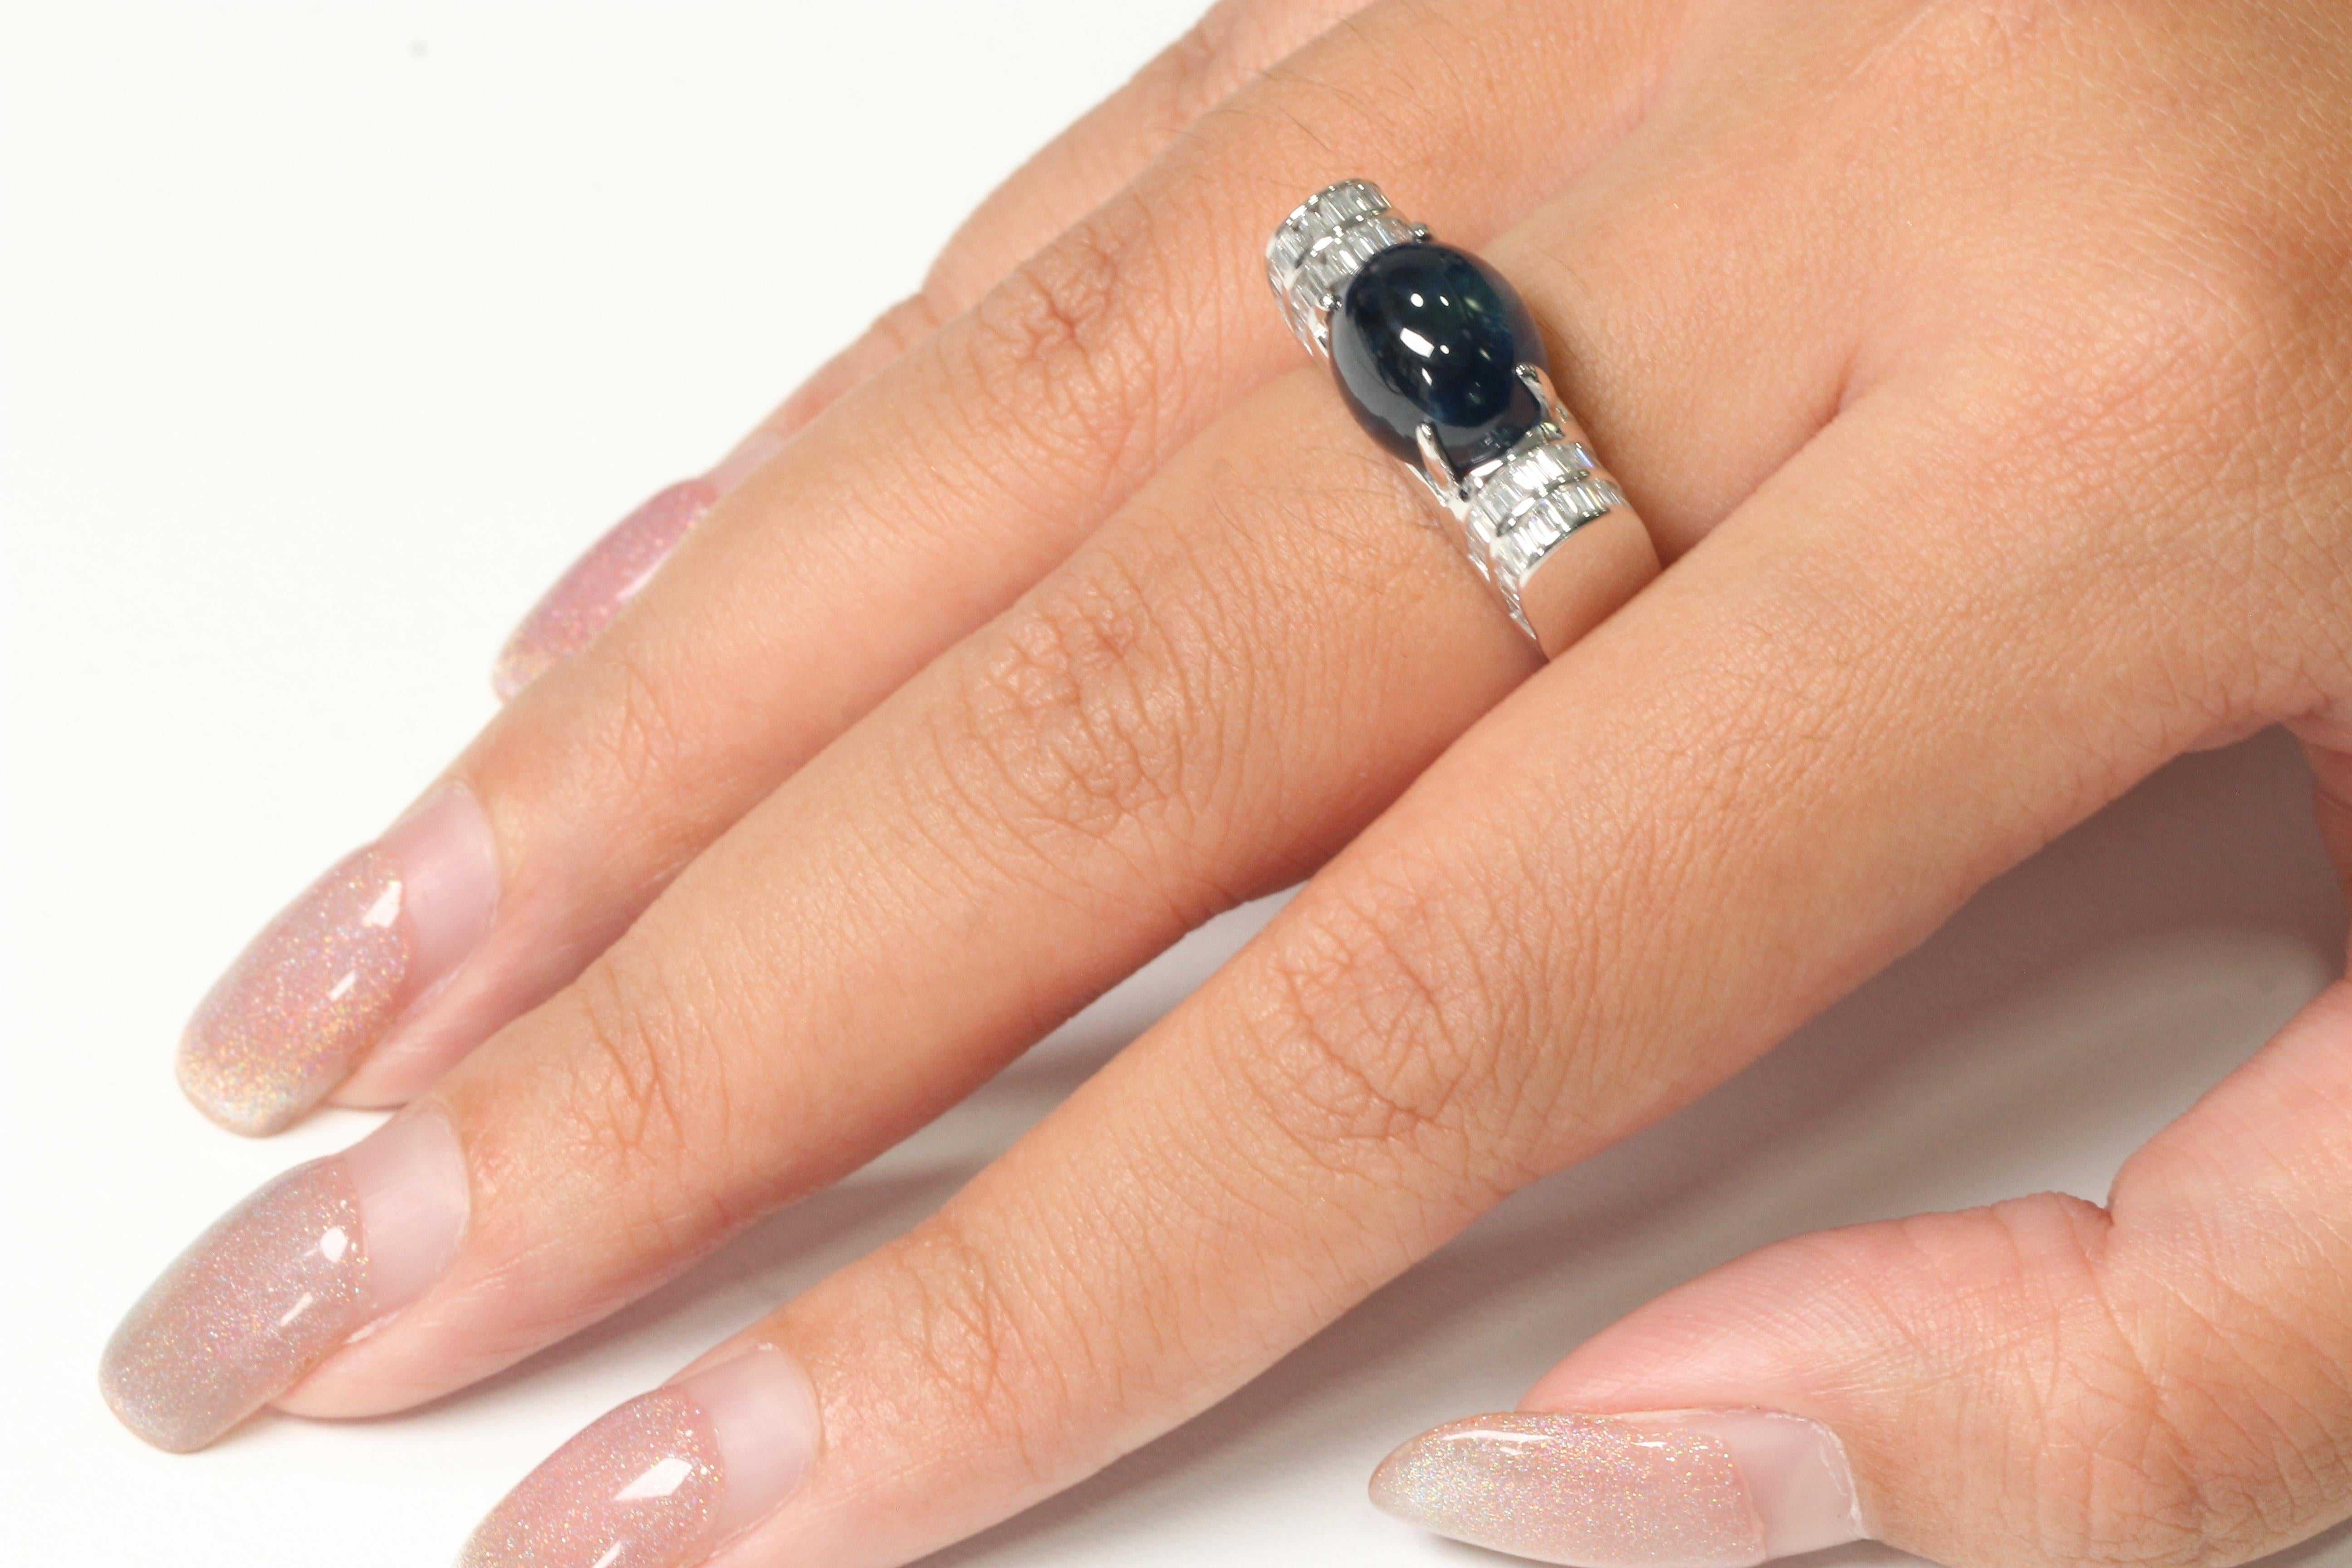 A gorgeous sapphire and diamond dome ring in 18K gold. This stunning 18K white gold sapphire and diamond dome ring will give your look a glamorous update. The blue sapphire is so eye-catching, it will make any outfit pop! You can also add additional